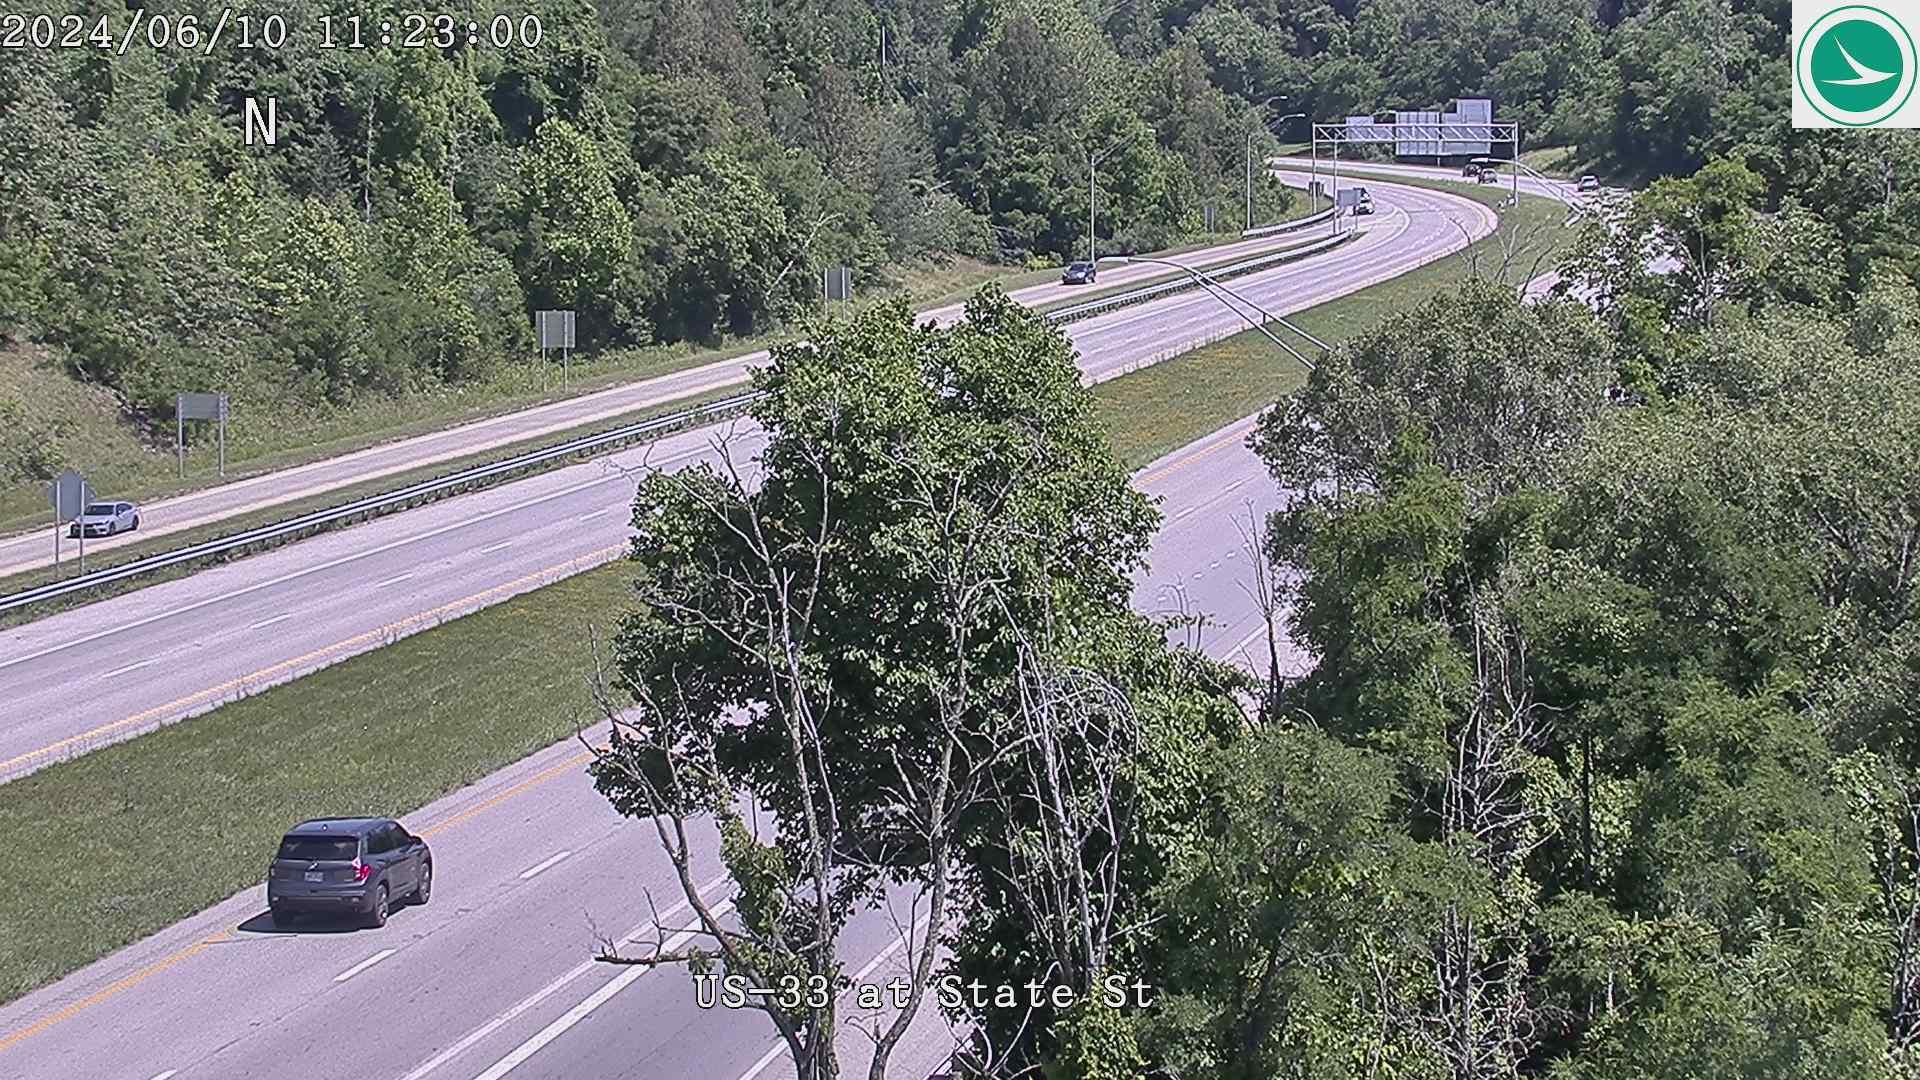 Traffic Cam Athens: US-33 at E State Rd